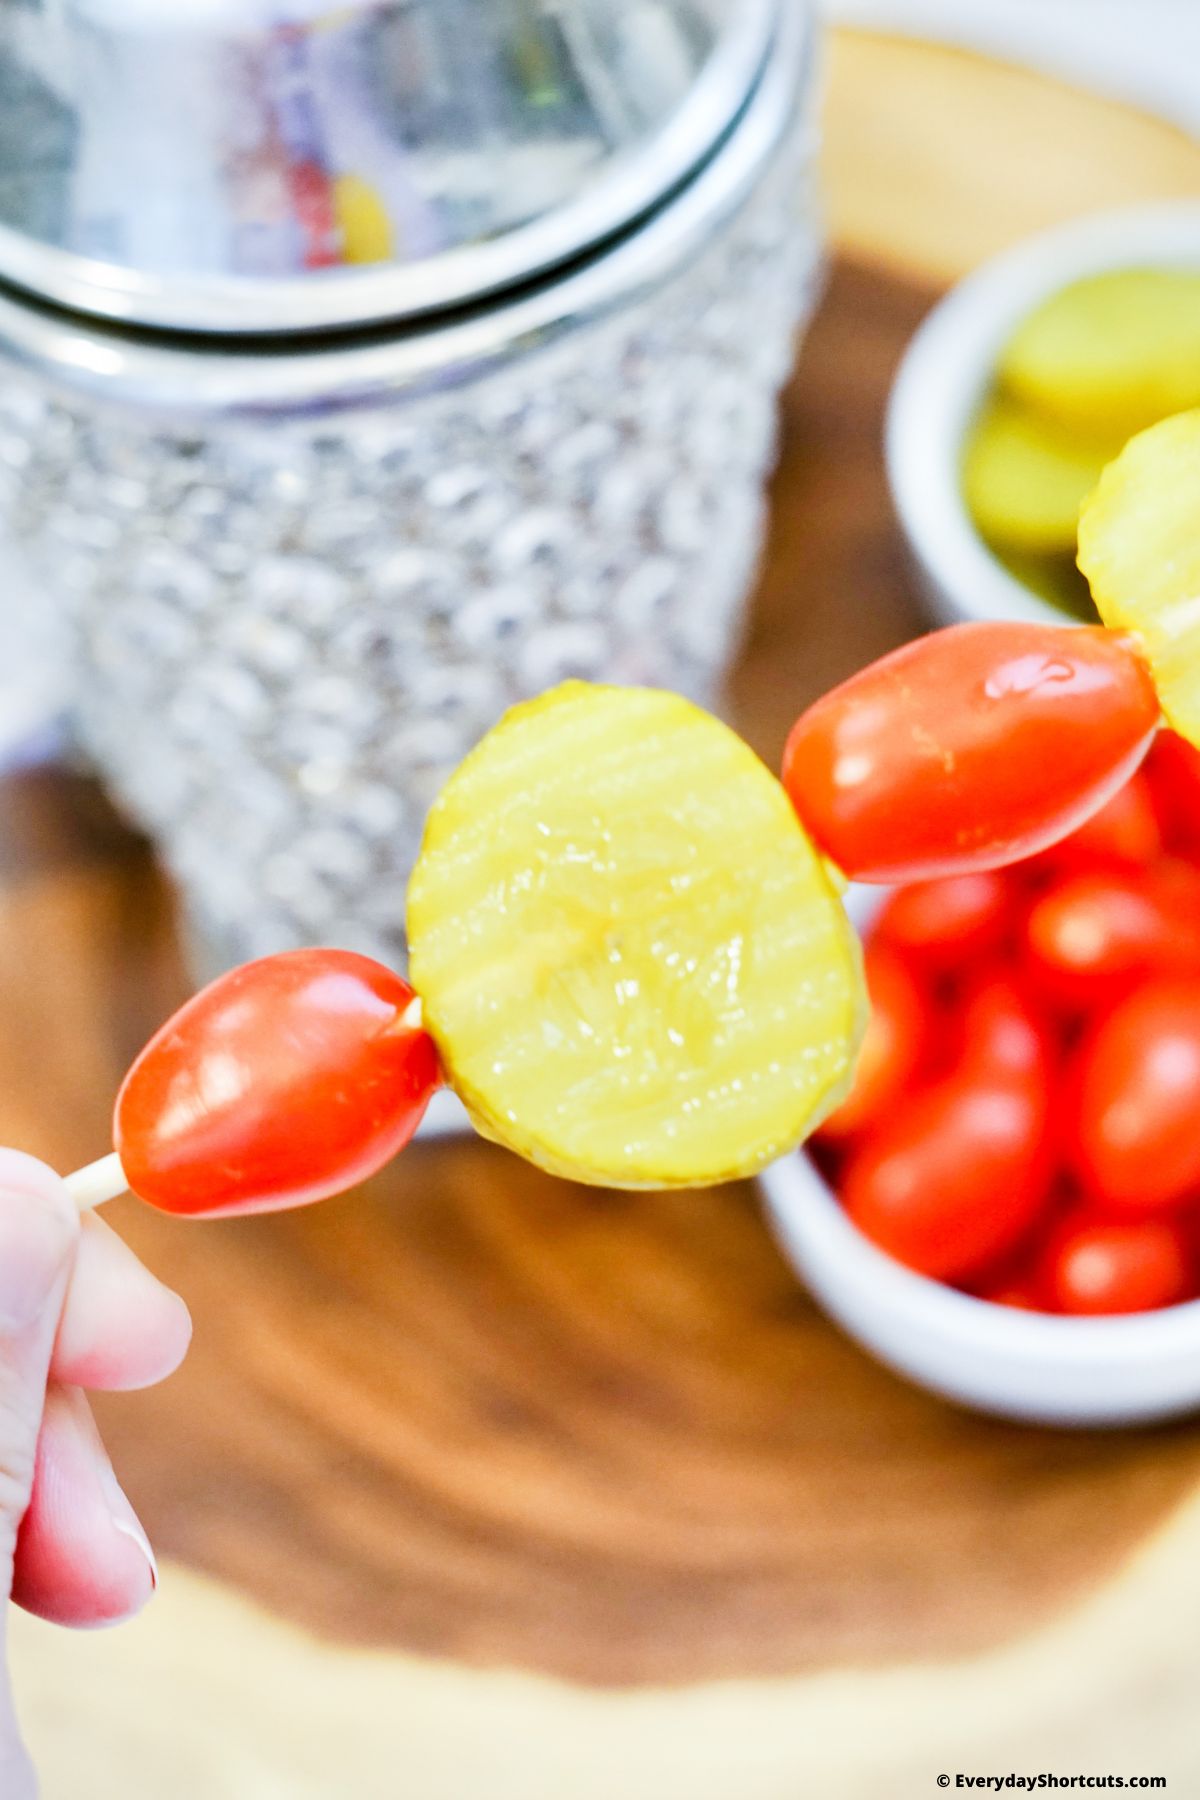 pickle chips and cherry tomatoes on a skewer stick